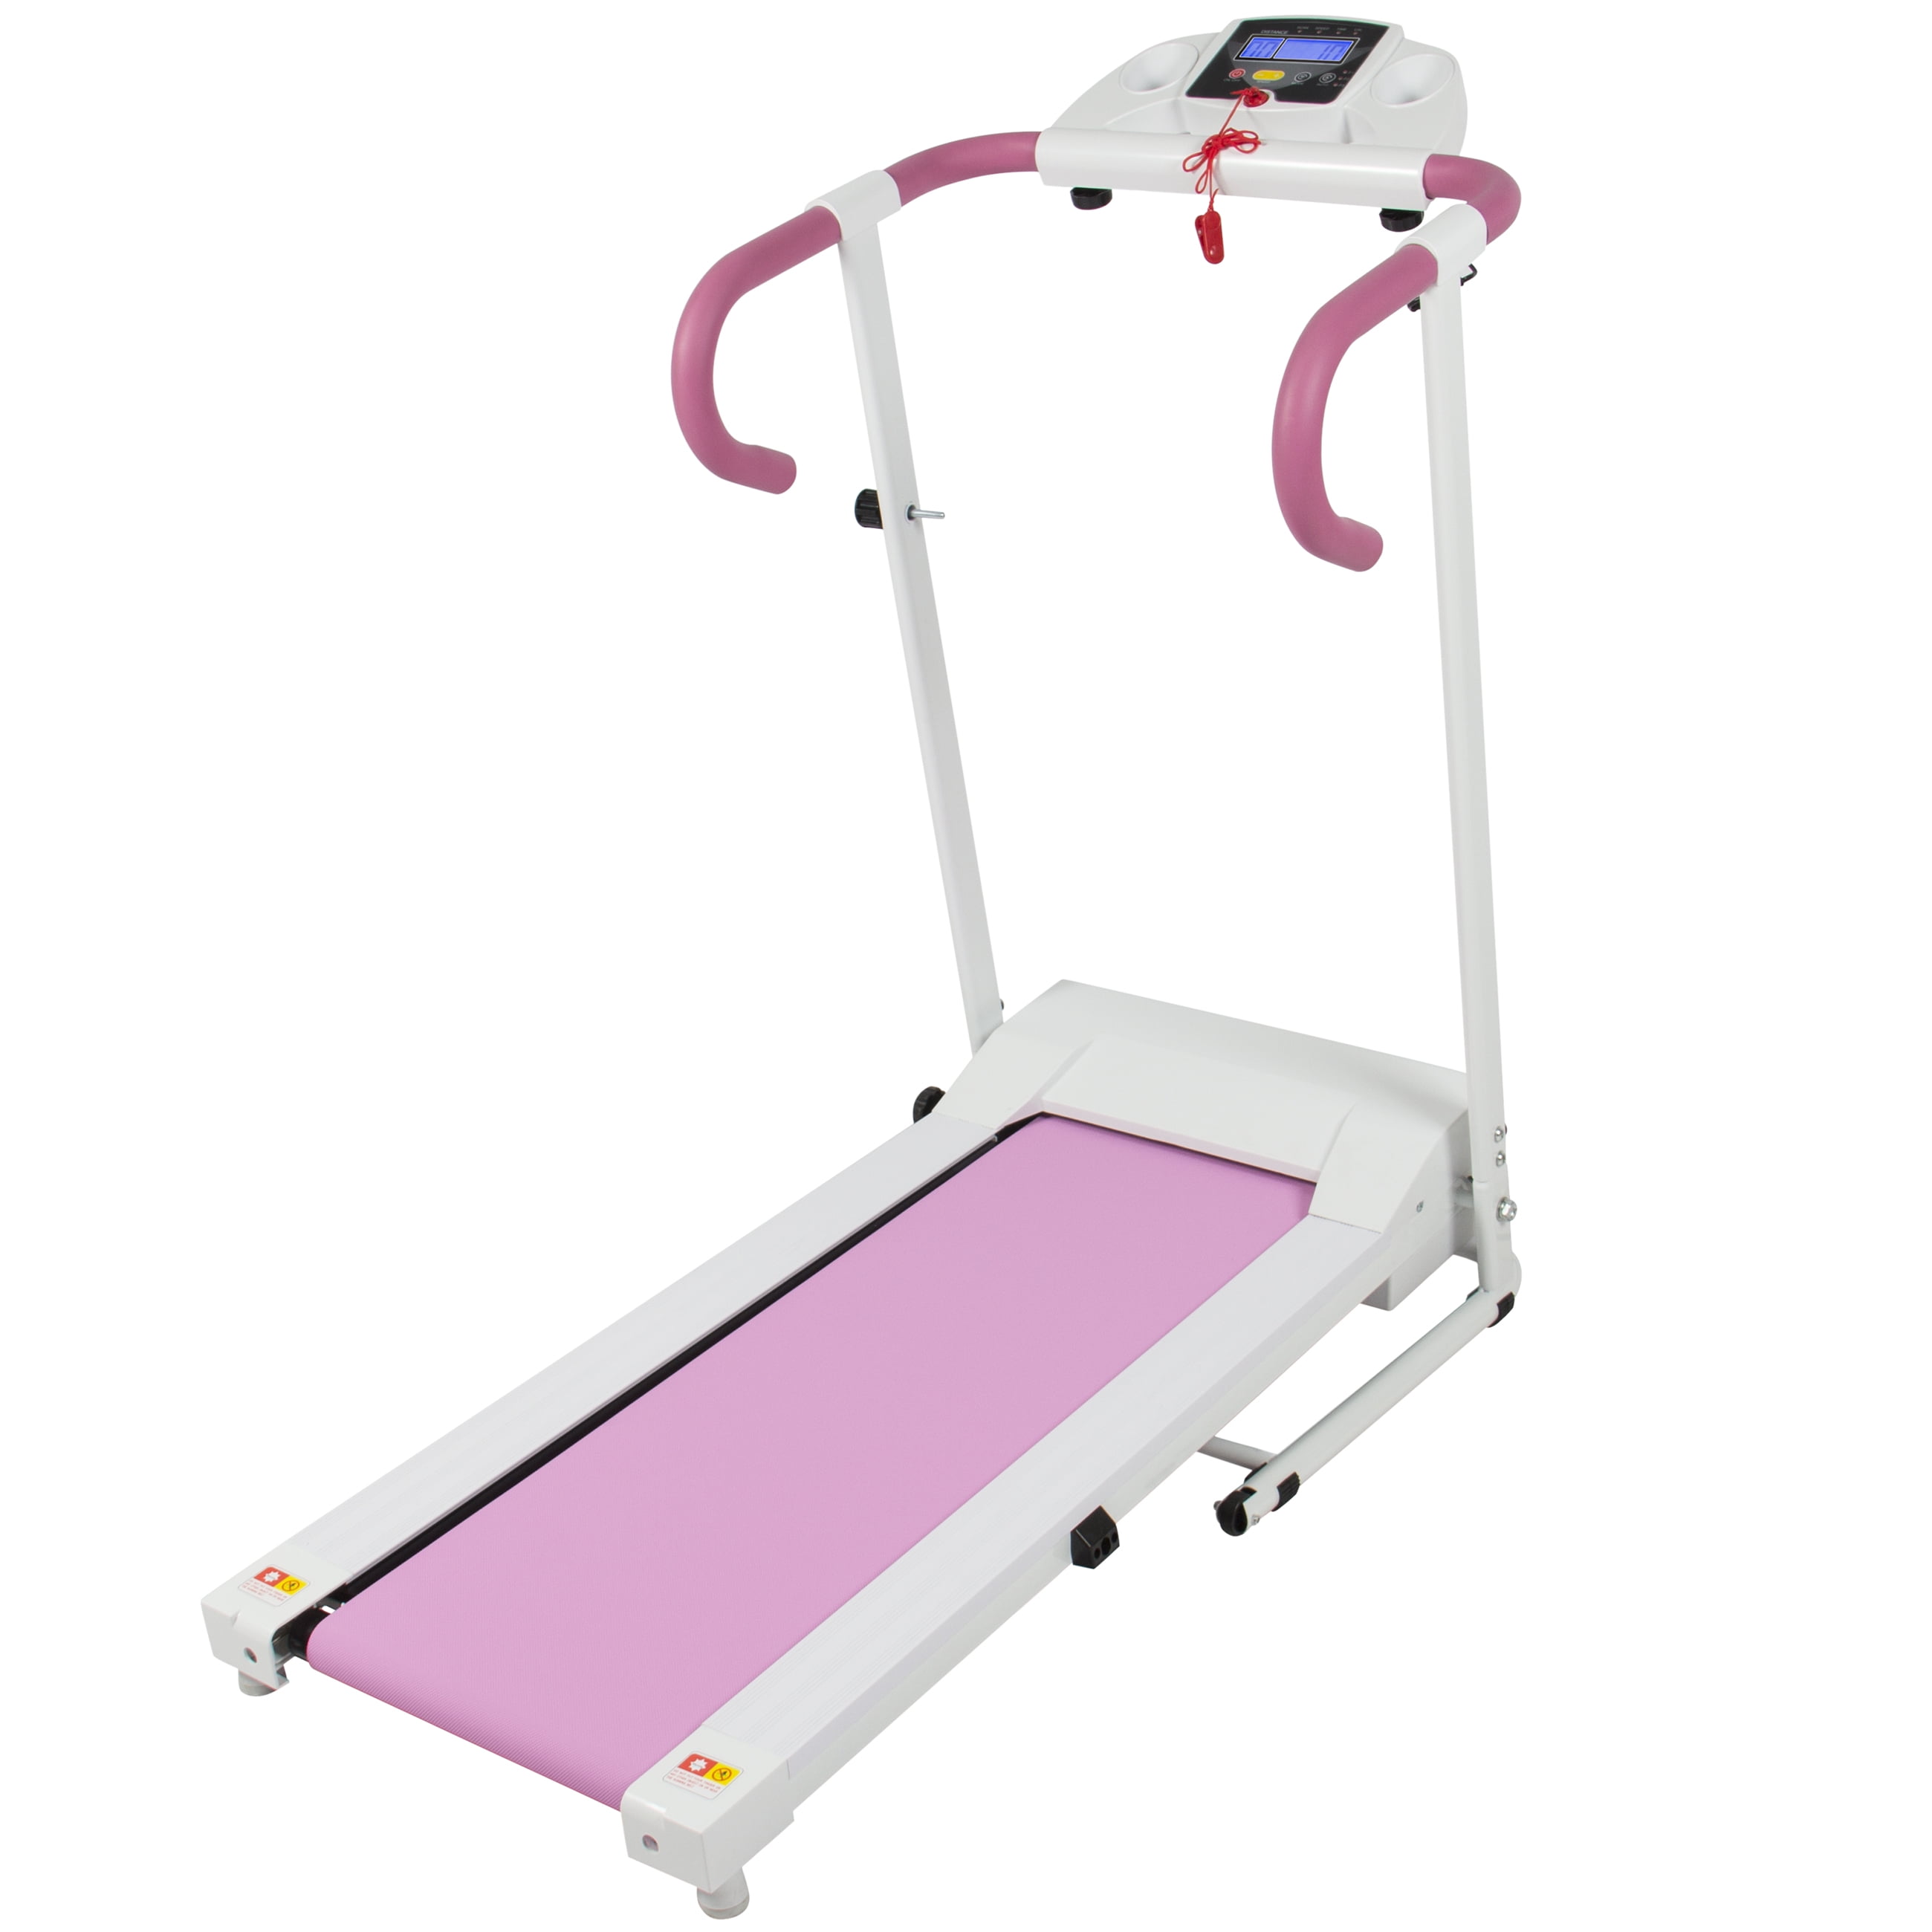 Best Choice Products Pink 500W Portable Folding Electric Motorized Treadmill Running Fitness Machine